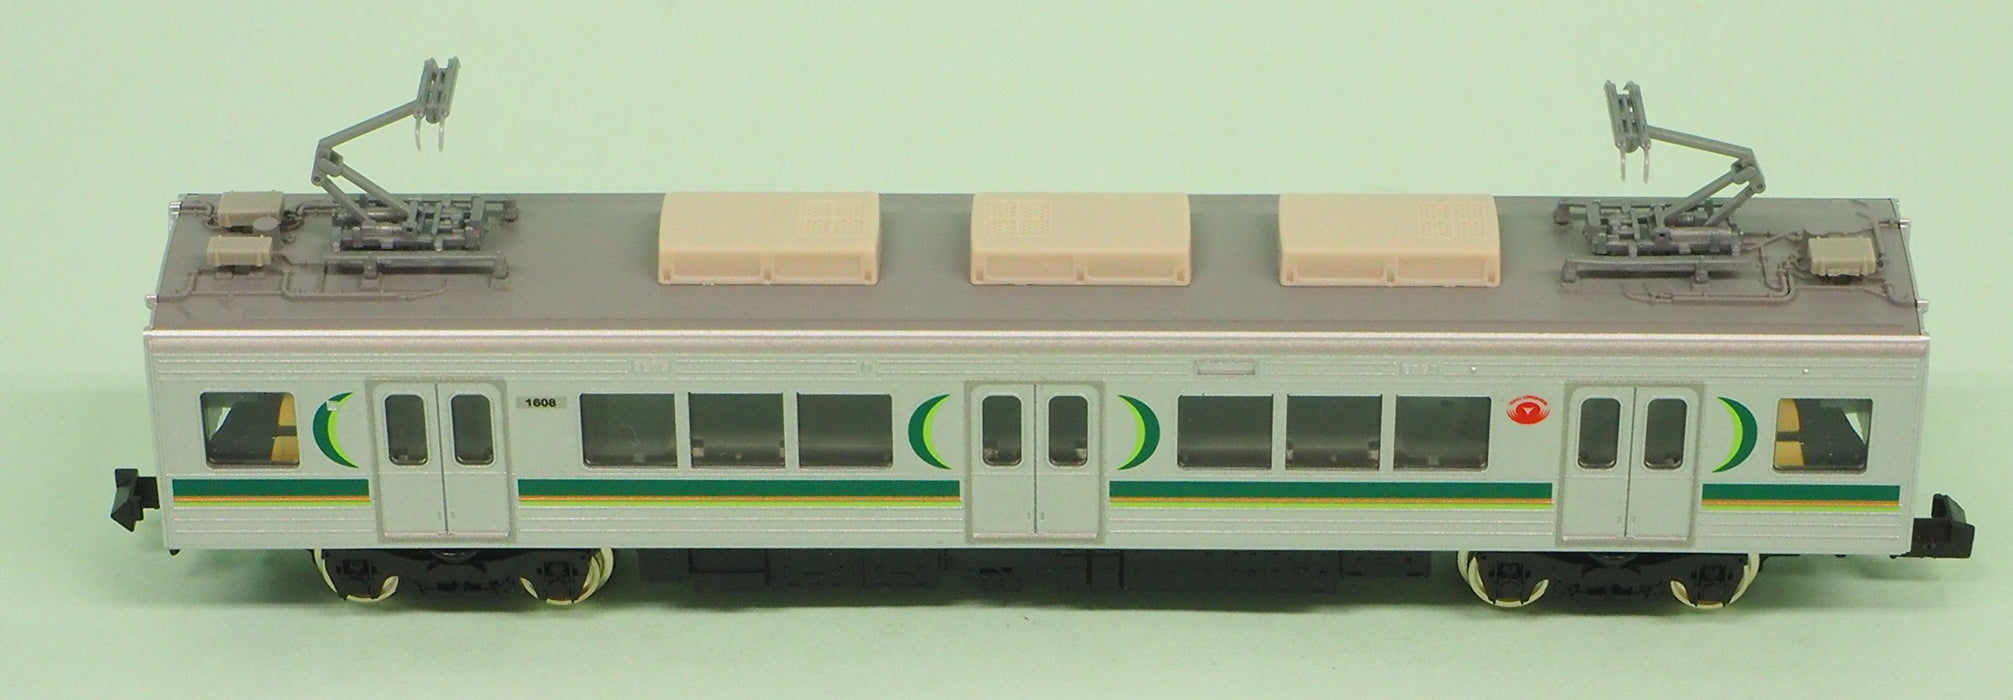 GREENMAX 30625 Tokyu Series 1000-1500 Reinforced Obstacle Deflector 3 Cars Set N Scale